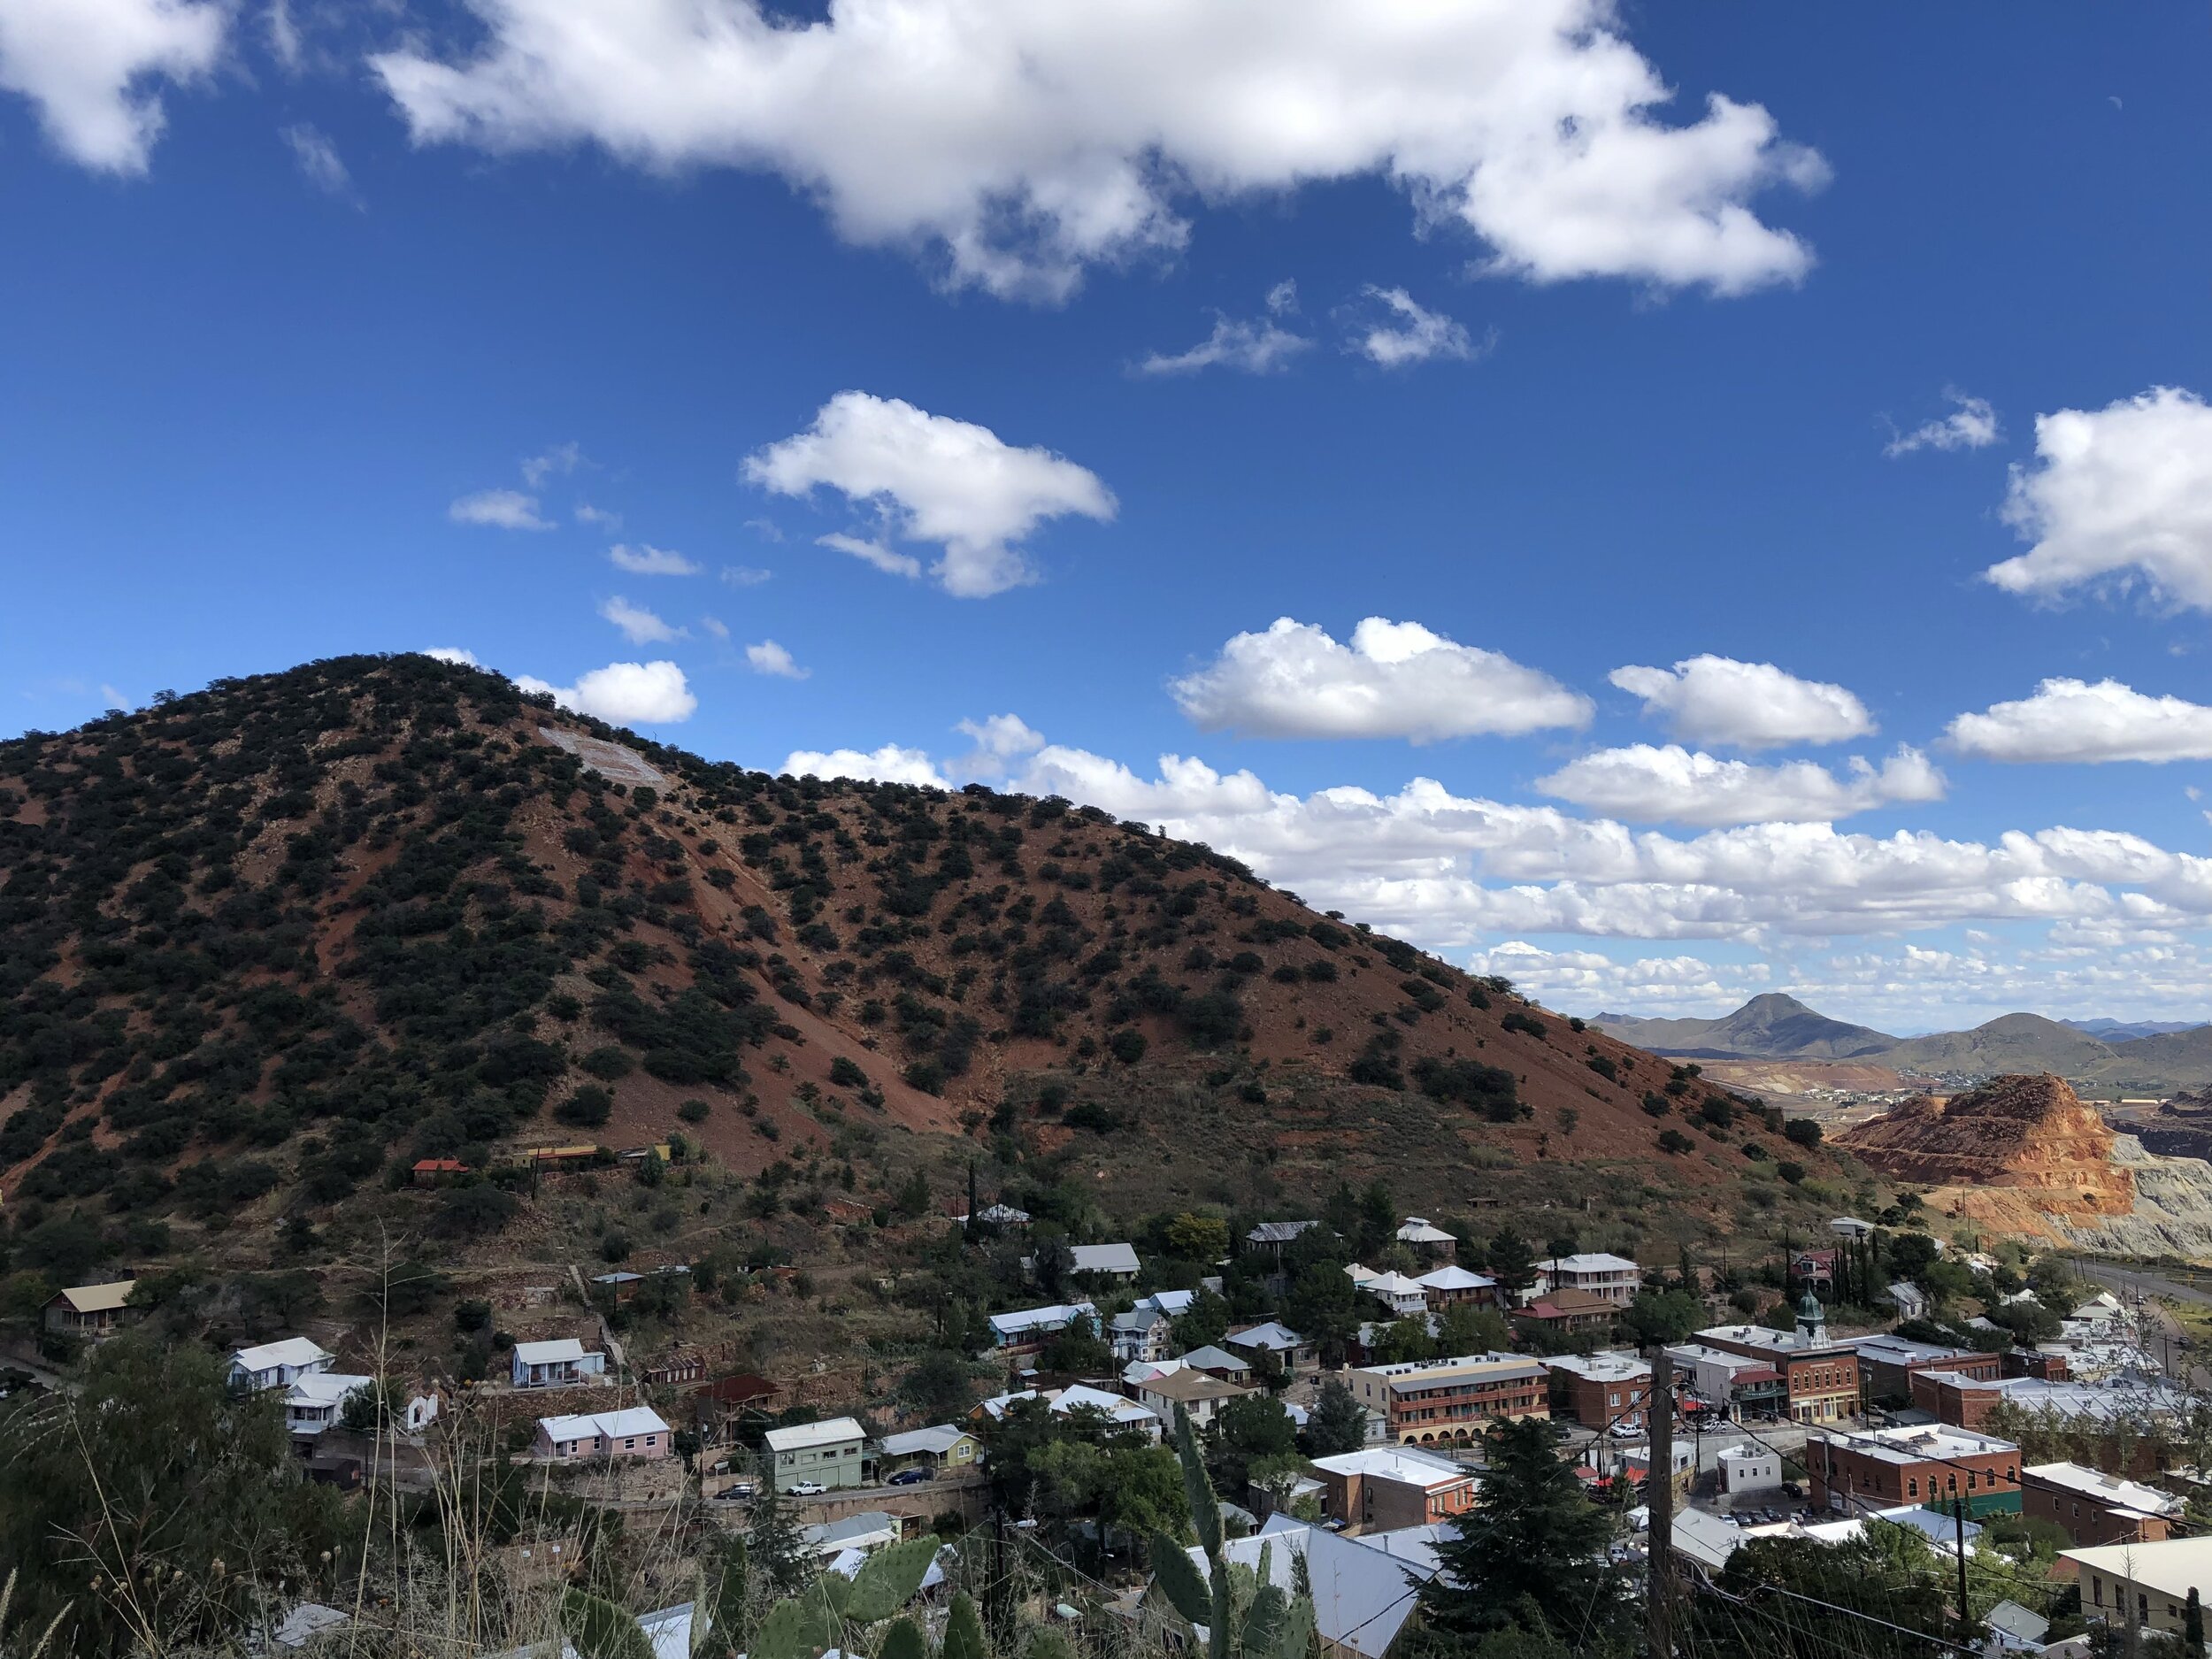   Bisbee from Above  